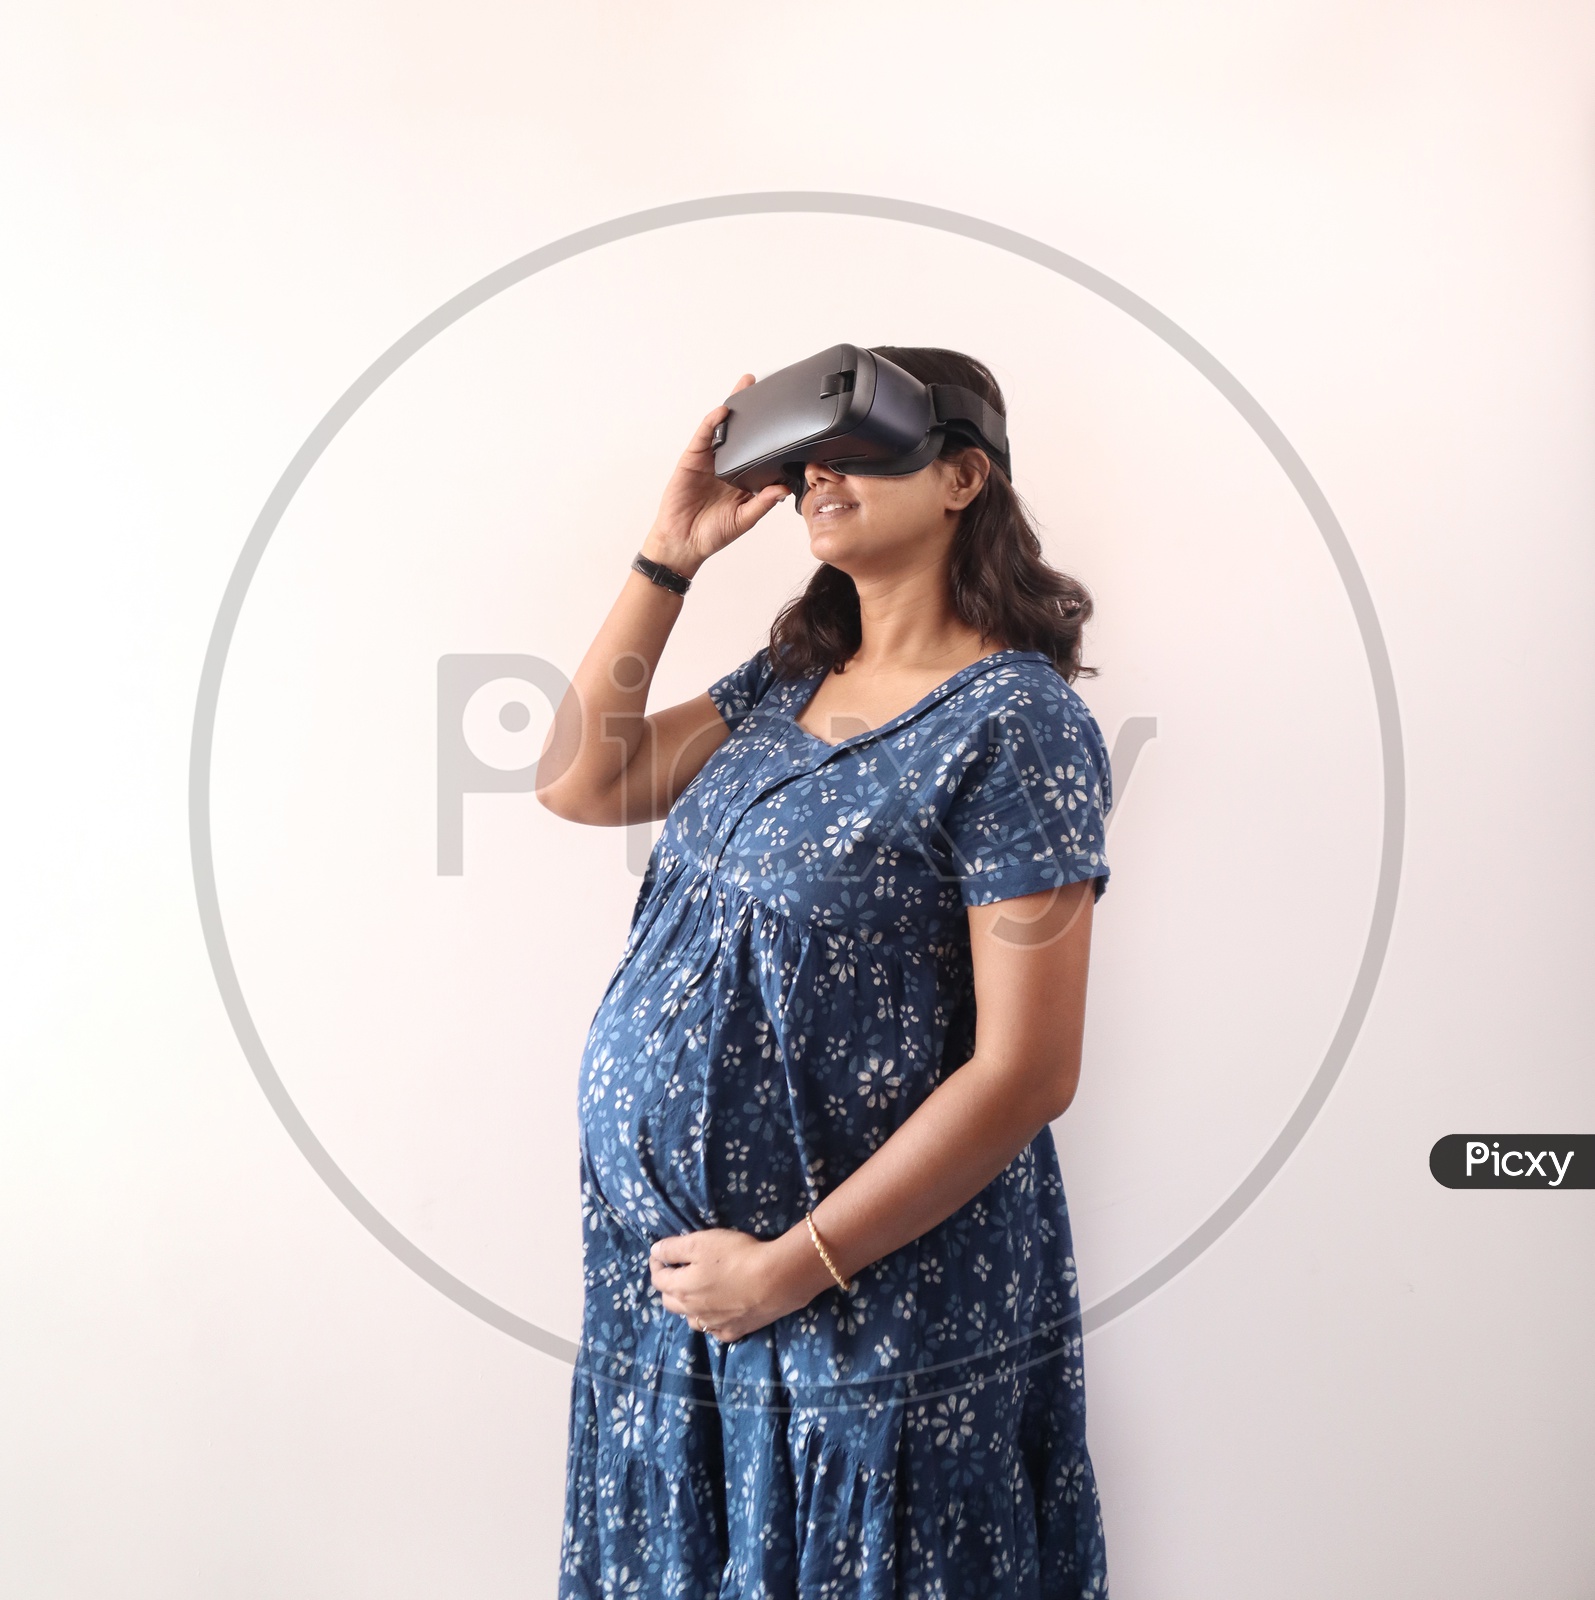 A Pregnant Woman With Hands On Belly And using Virtual Reality Glass In Eye In Blue Dress.